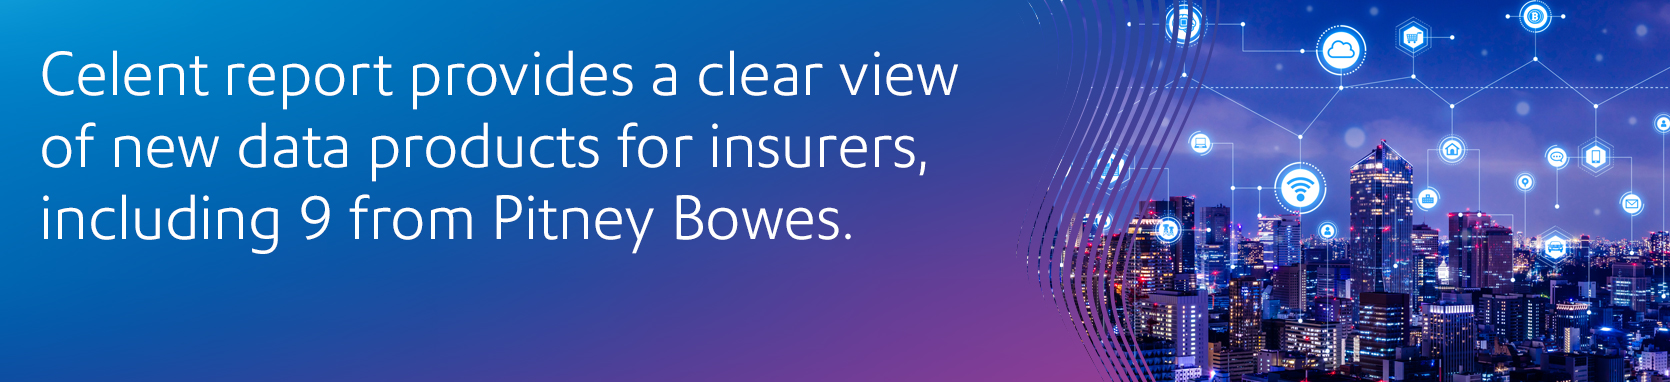 Celent report provides a clear view of new data products for insurers, including 9 from Pitney Bowes.